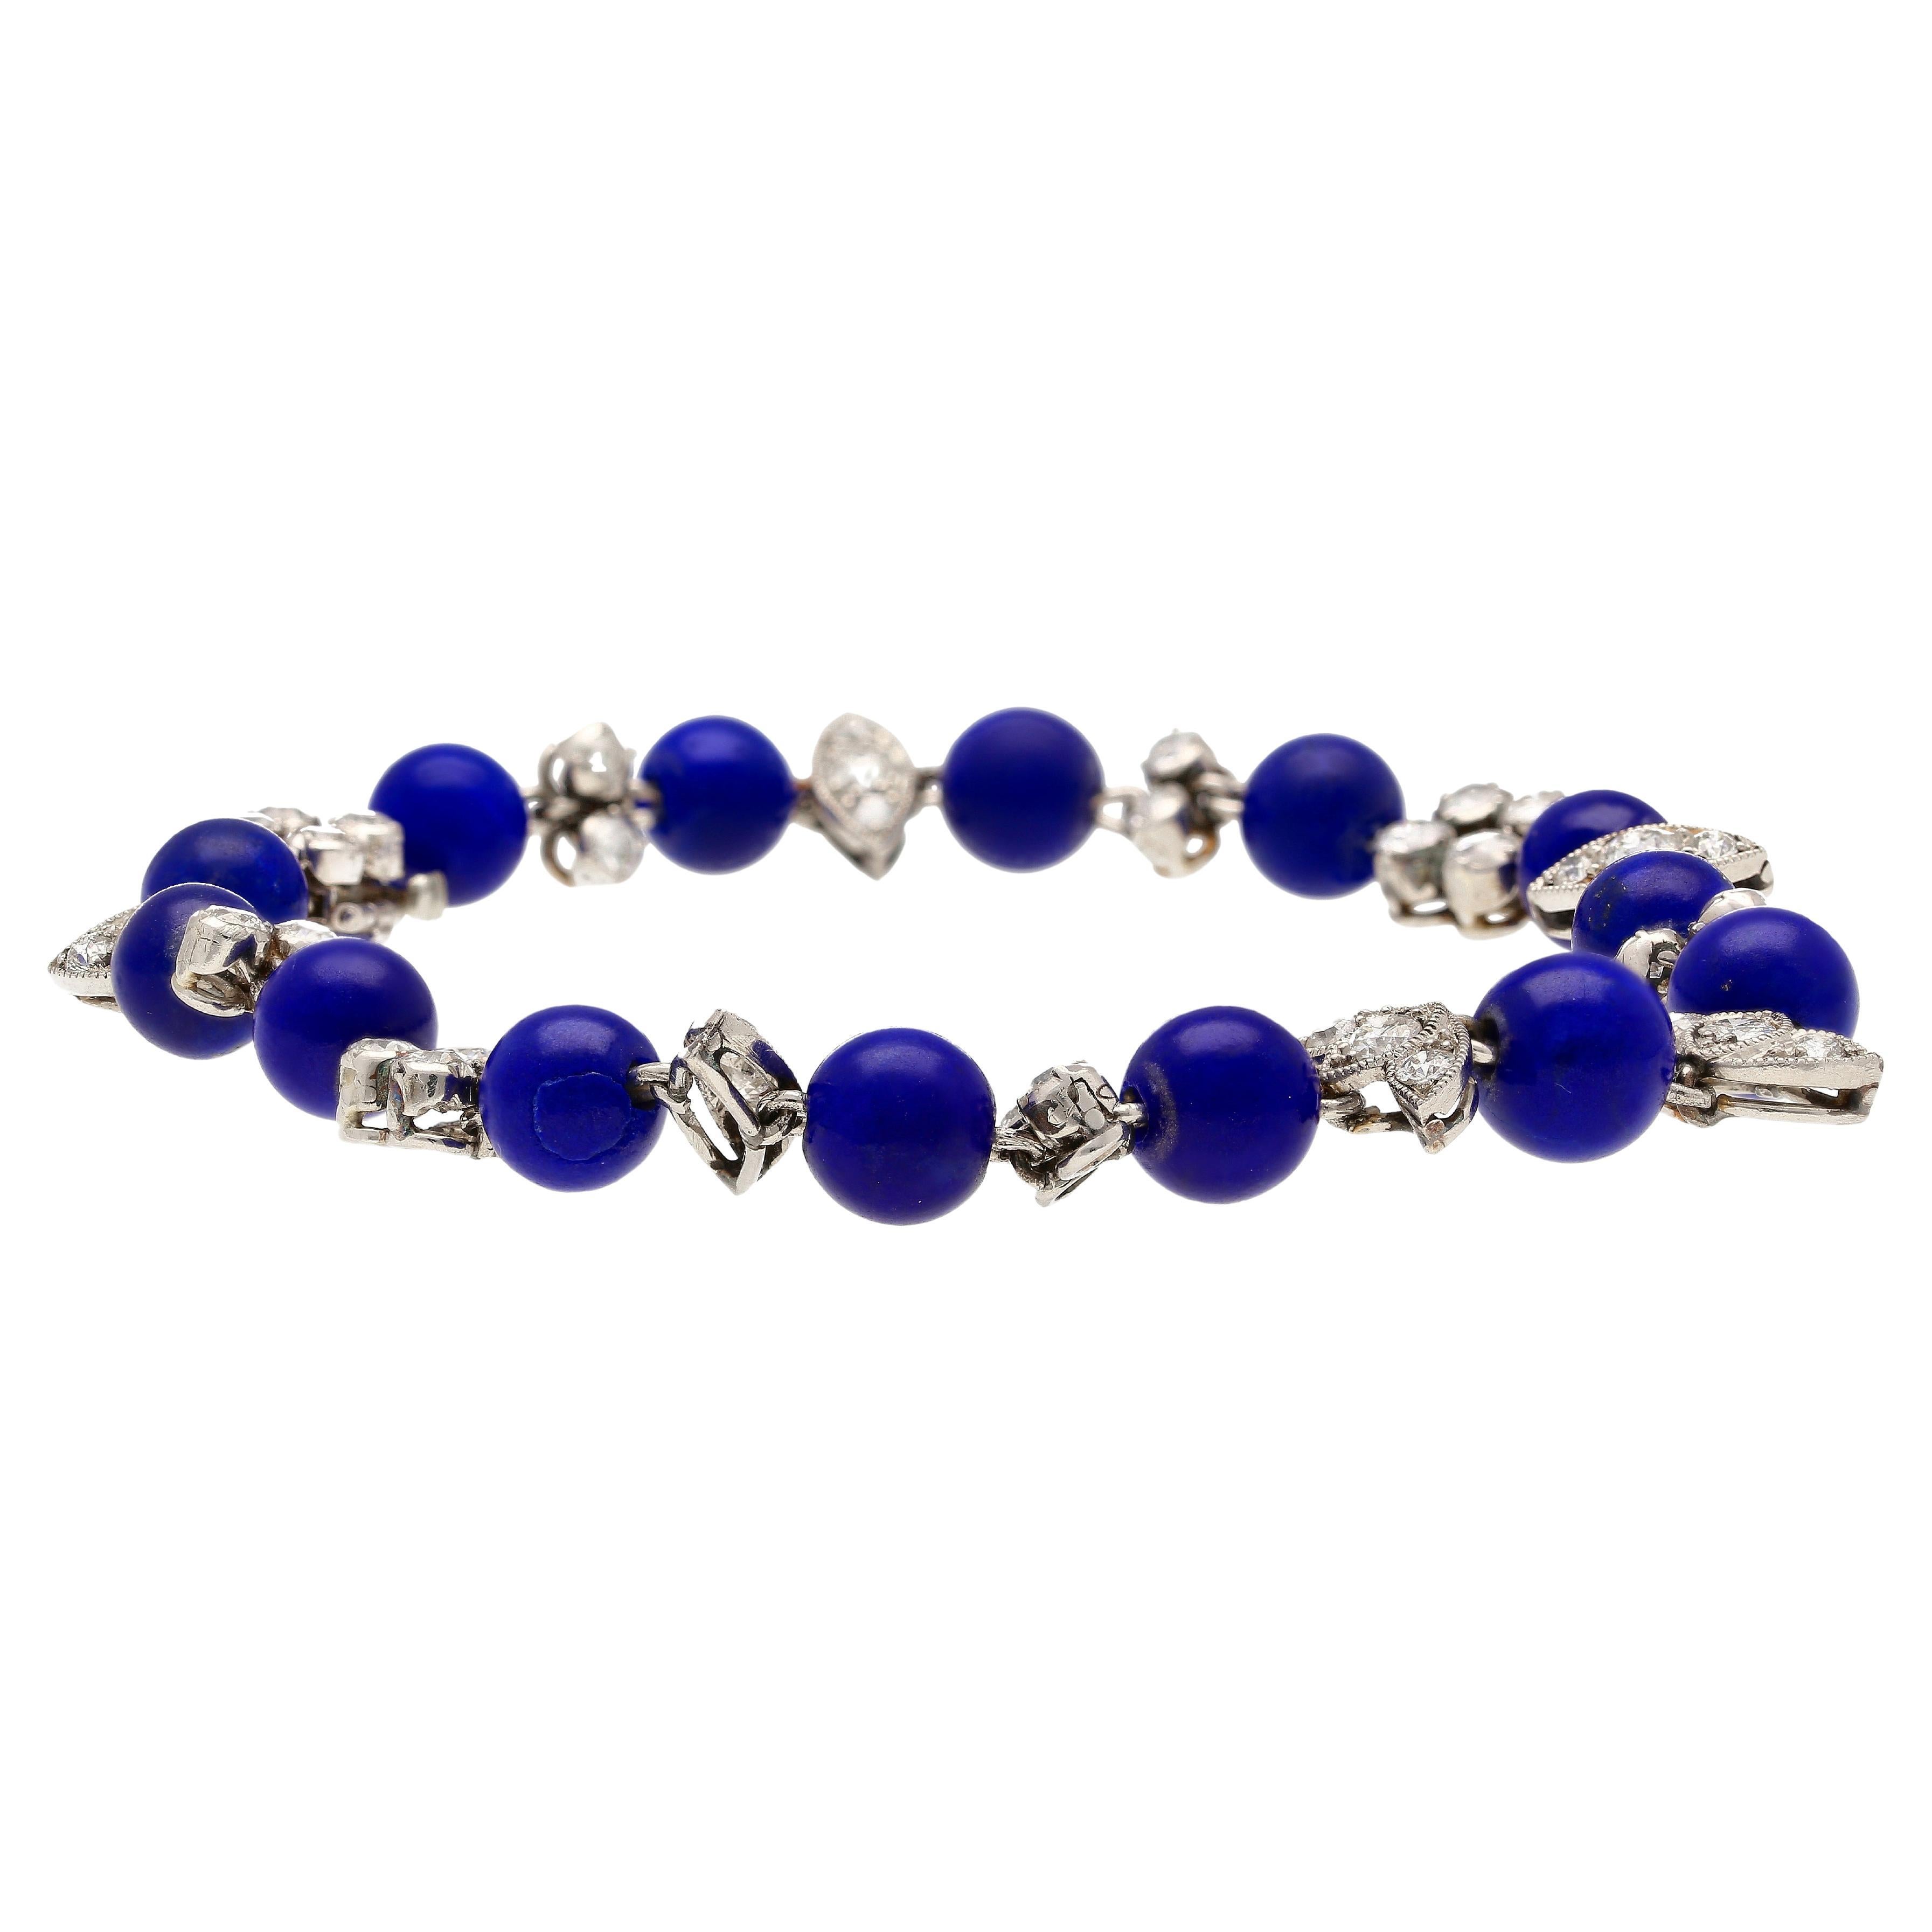 Vintage Art Deco era Blue Lapis and Diamond floral motif link bracelet. Set with 14 Lapis Lazuli beads and 40 round-cut diamonds. This piece is an original Art Deco era bracelet. Circa 1930-40.

Lapis has been prized by antiquities for its intense